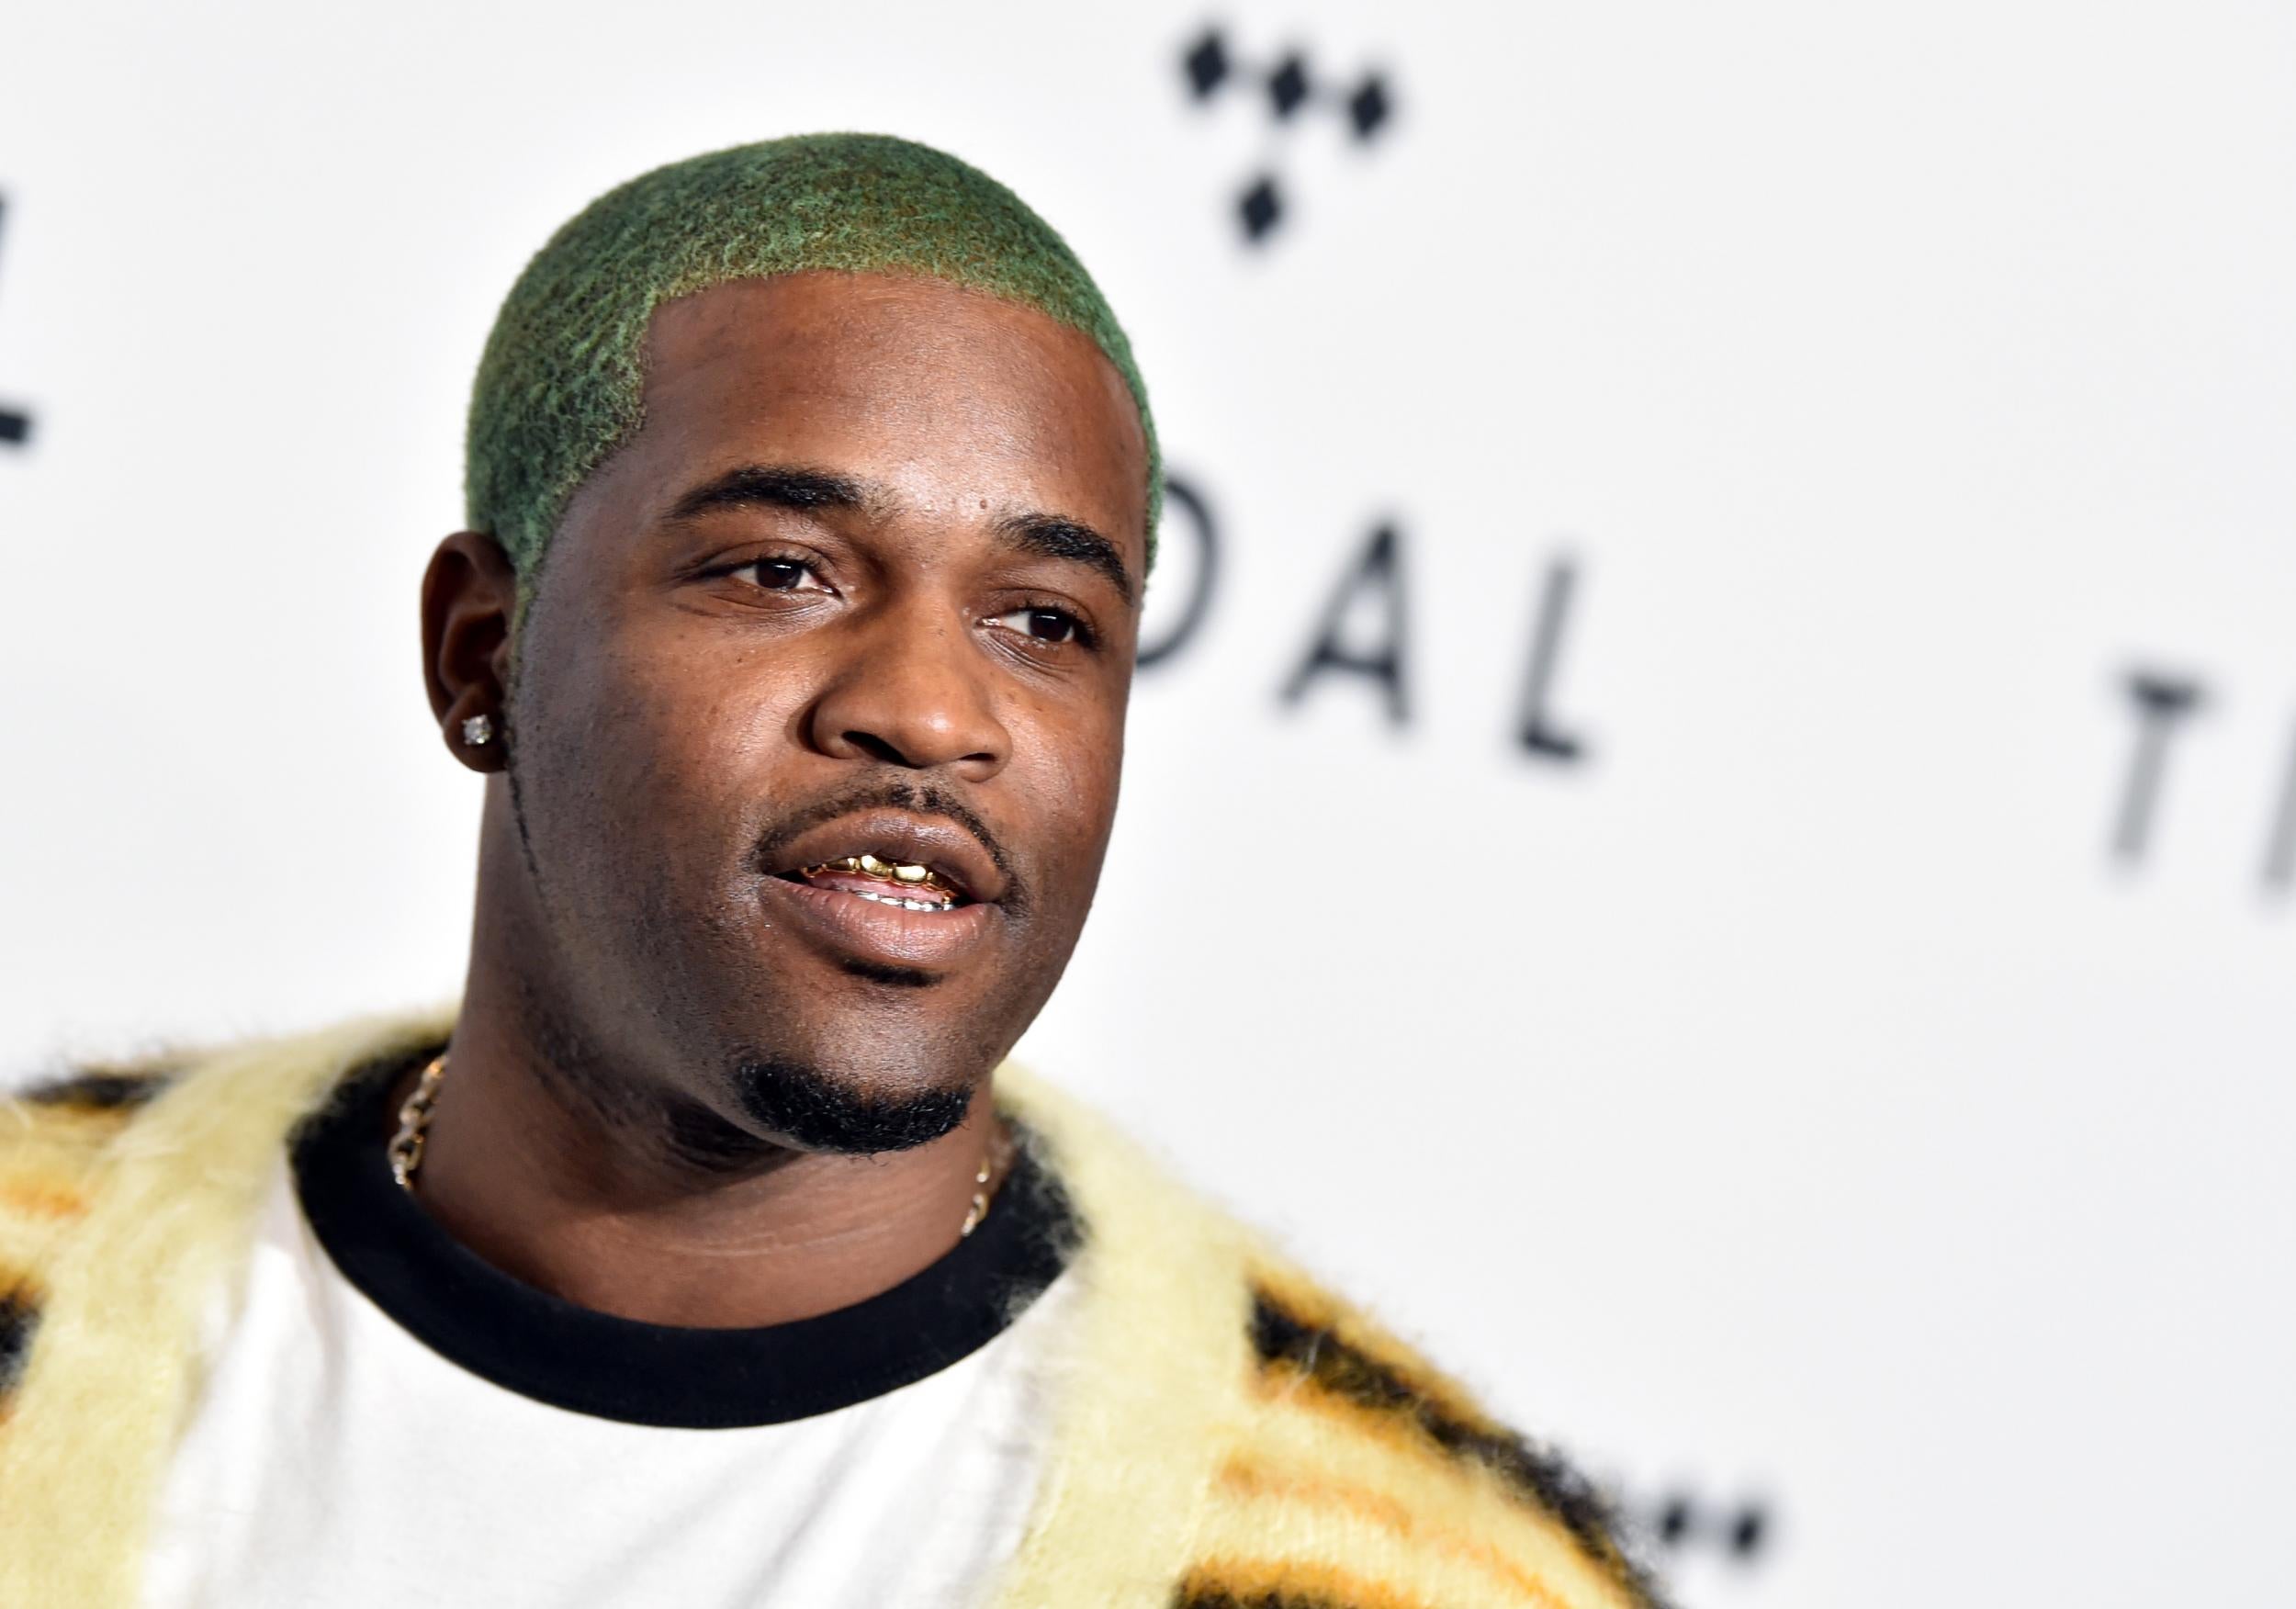 A$AP Mob co-founder A$AP Illz says Ferg is no longer affiliated with the hip-hop group